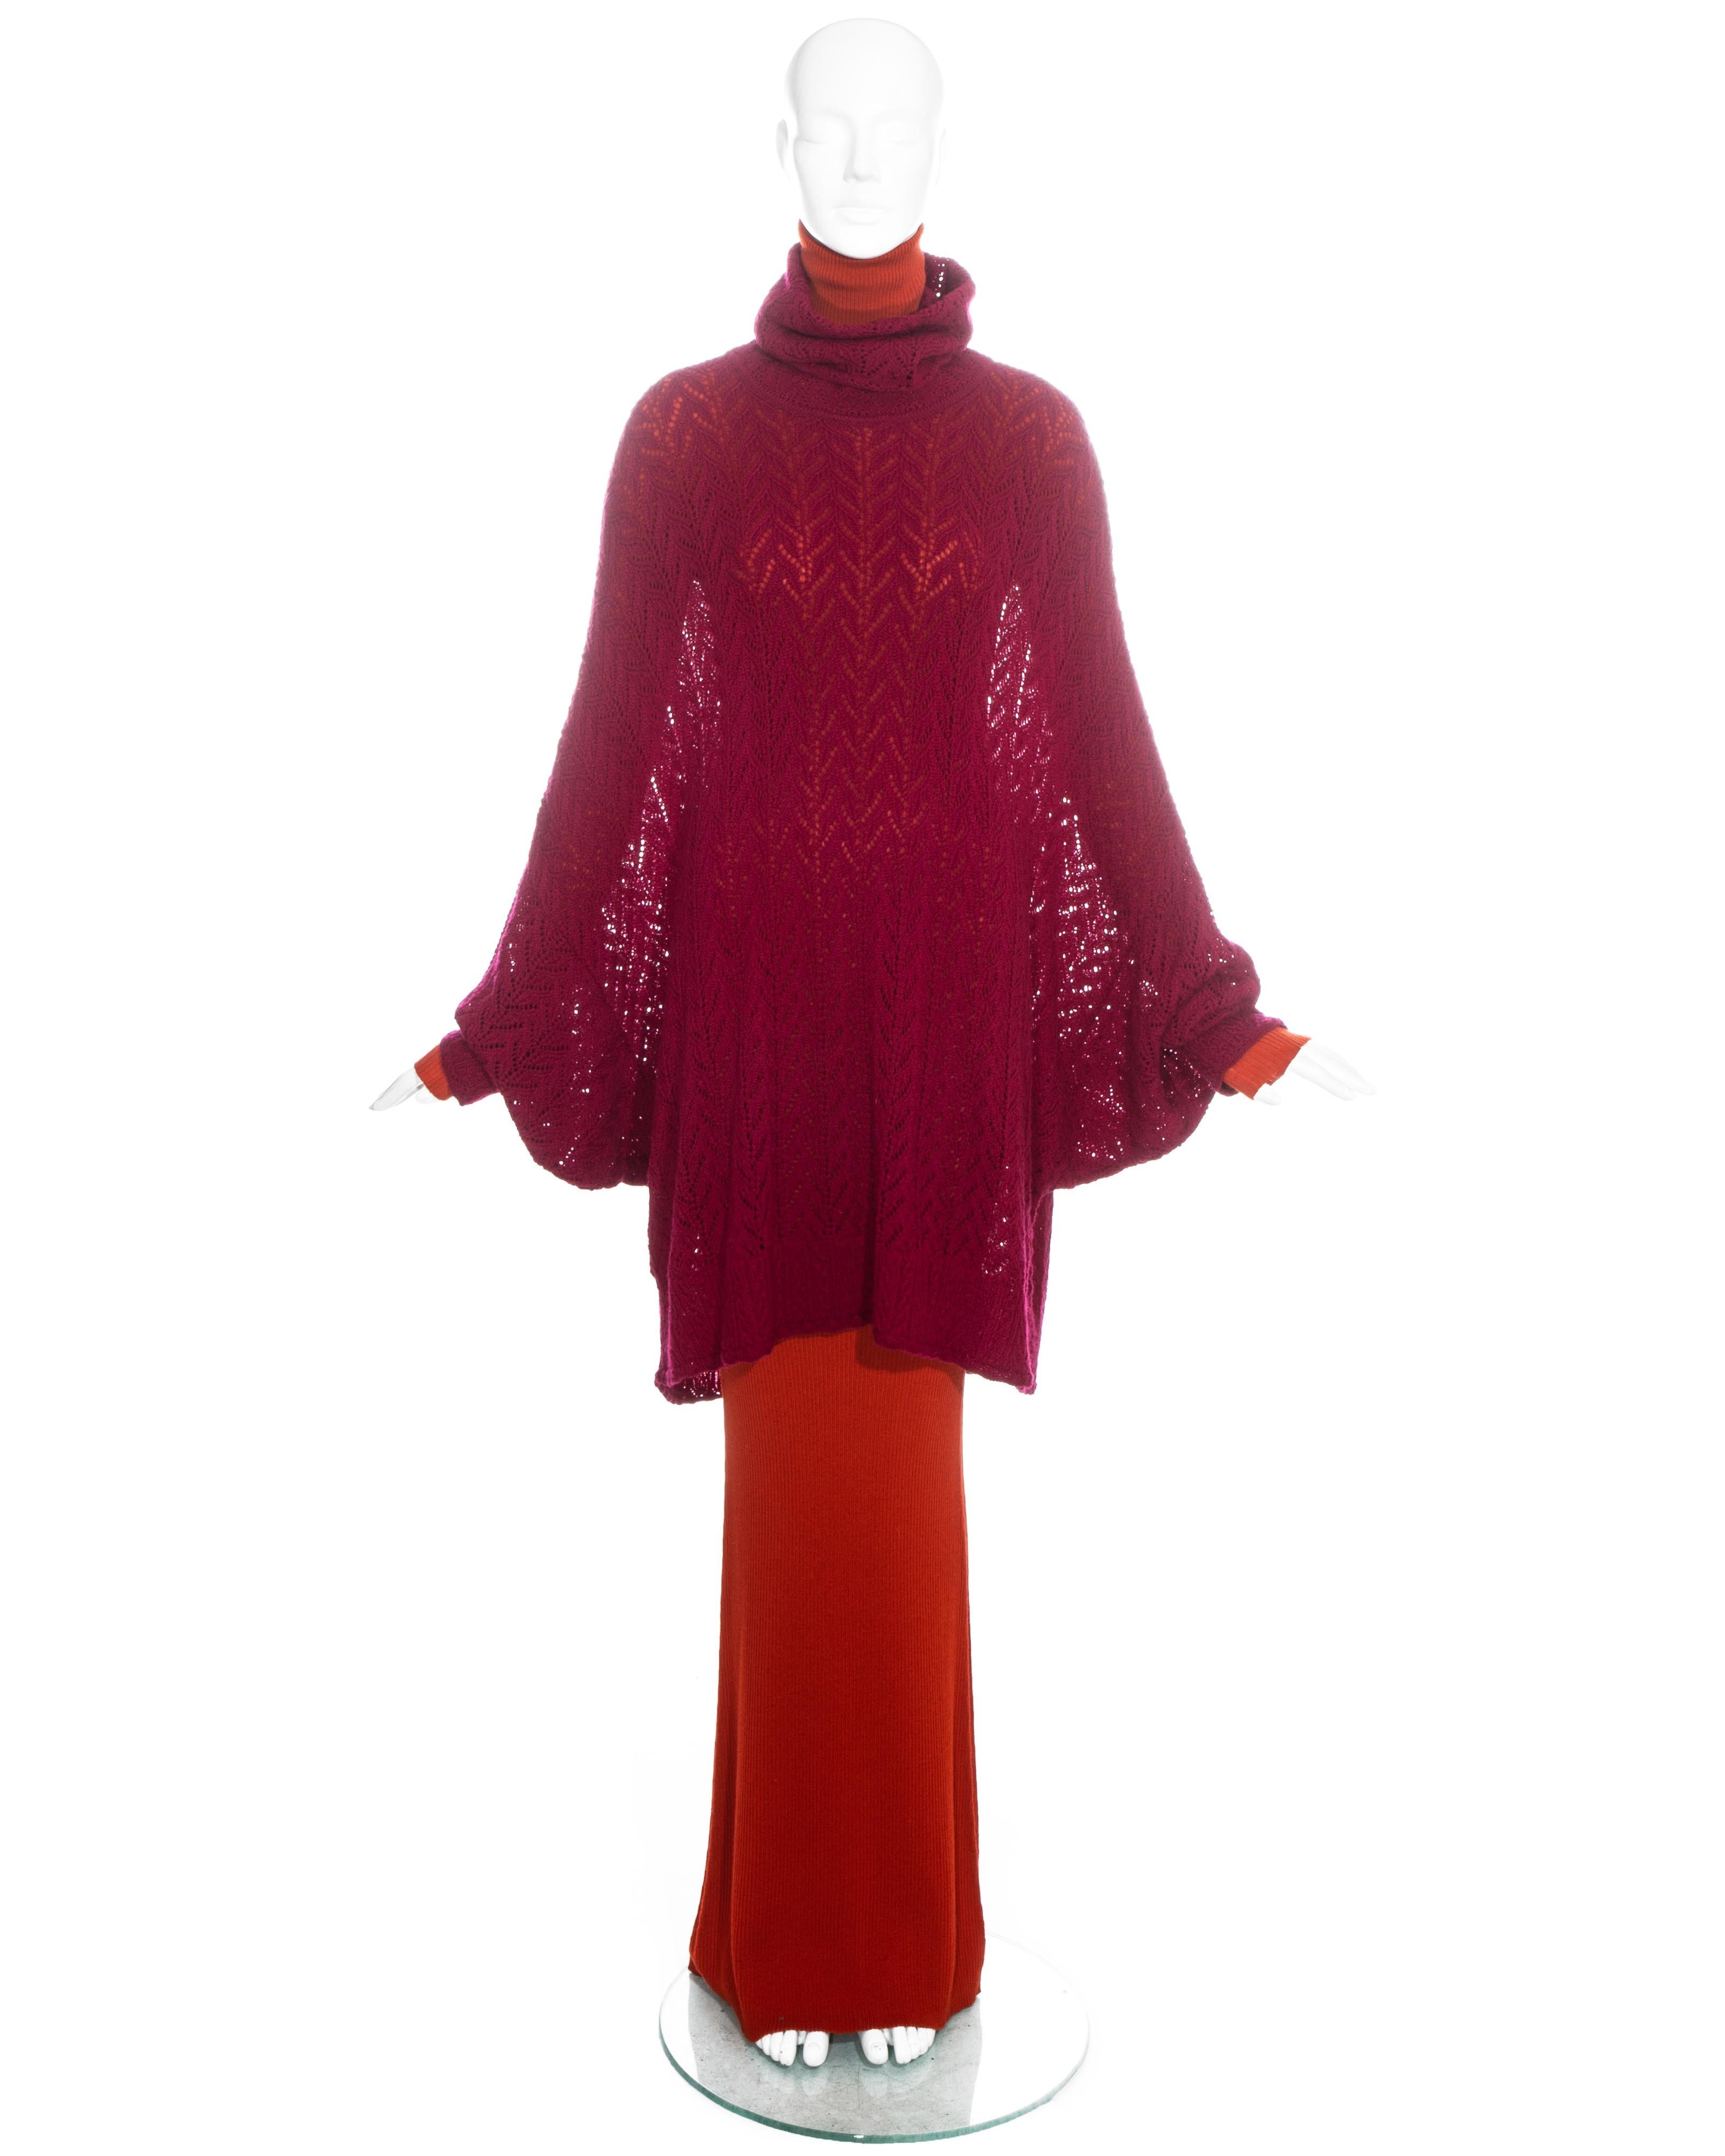 Christian Dior by John Galliano orange and maroon knitted ensemble comprising: rib-knit maxi dress with turtle neck and oversized crochet-knit sweater with bat wing sleeves and large collar. 

Fall-Winter 1998